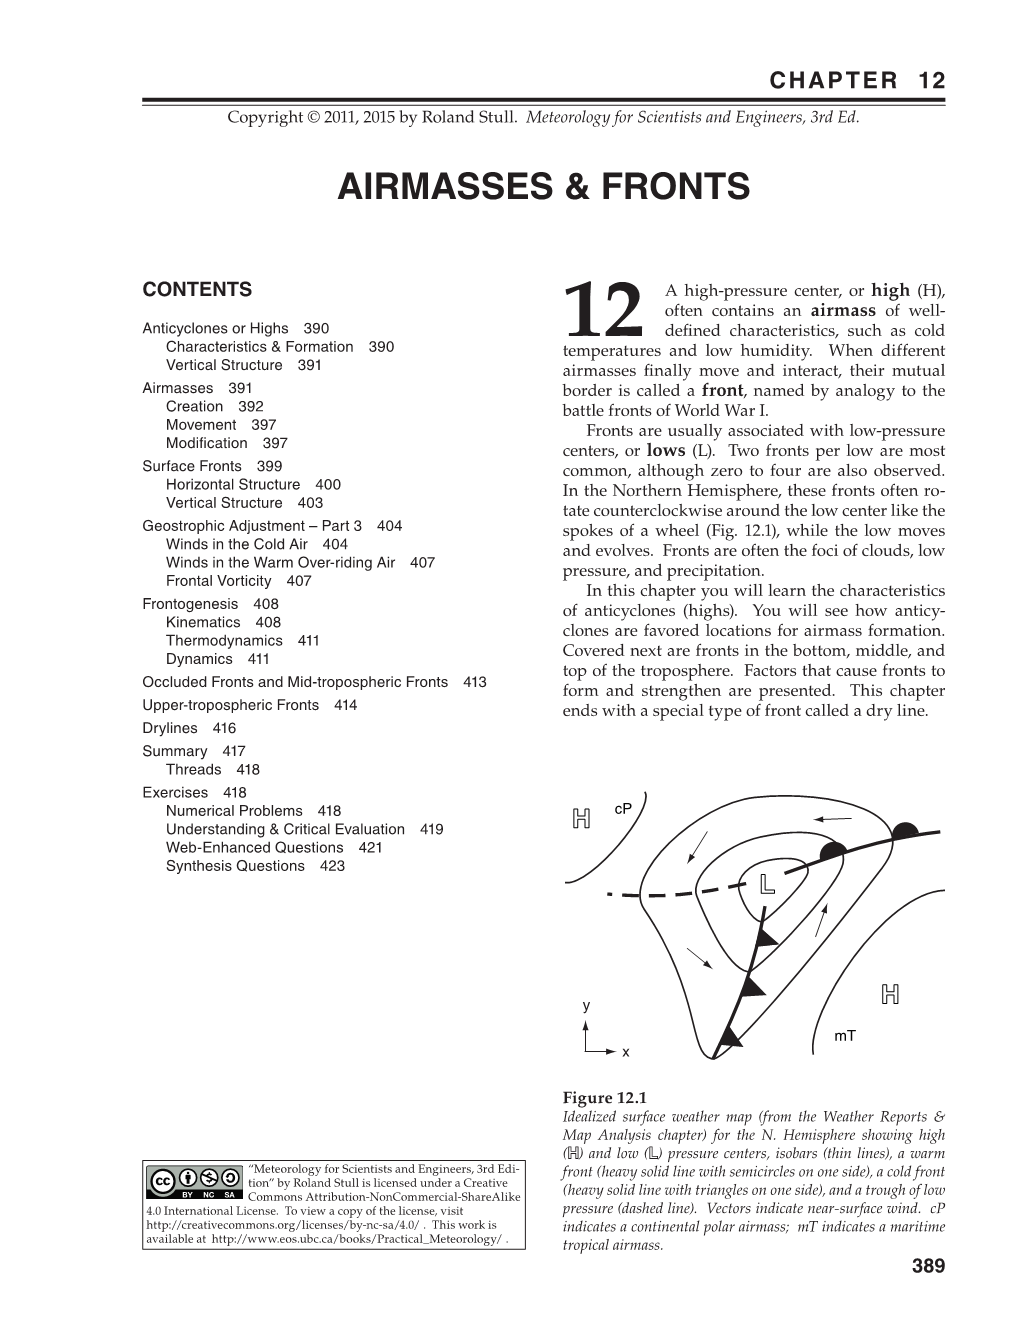 MSE3 Ch12 Airmasses & Fronts